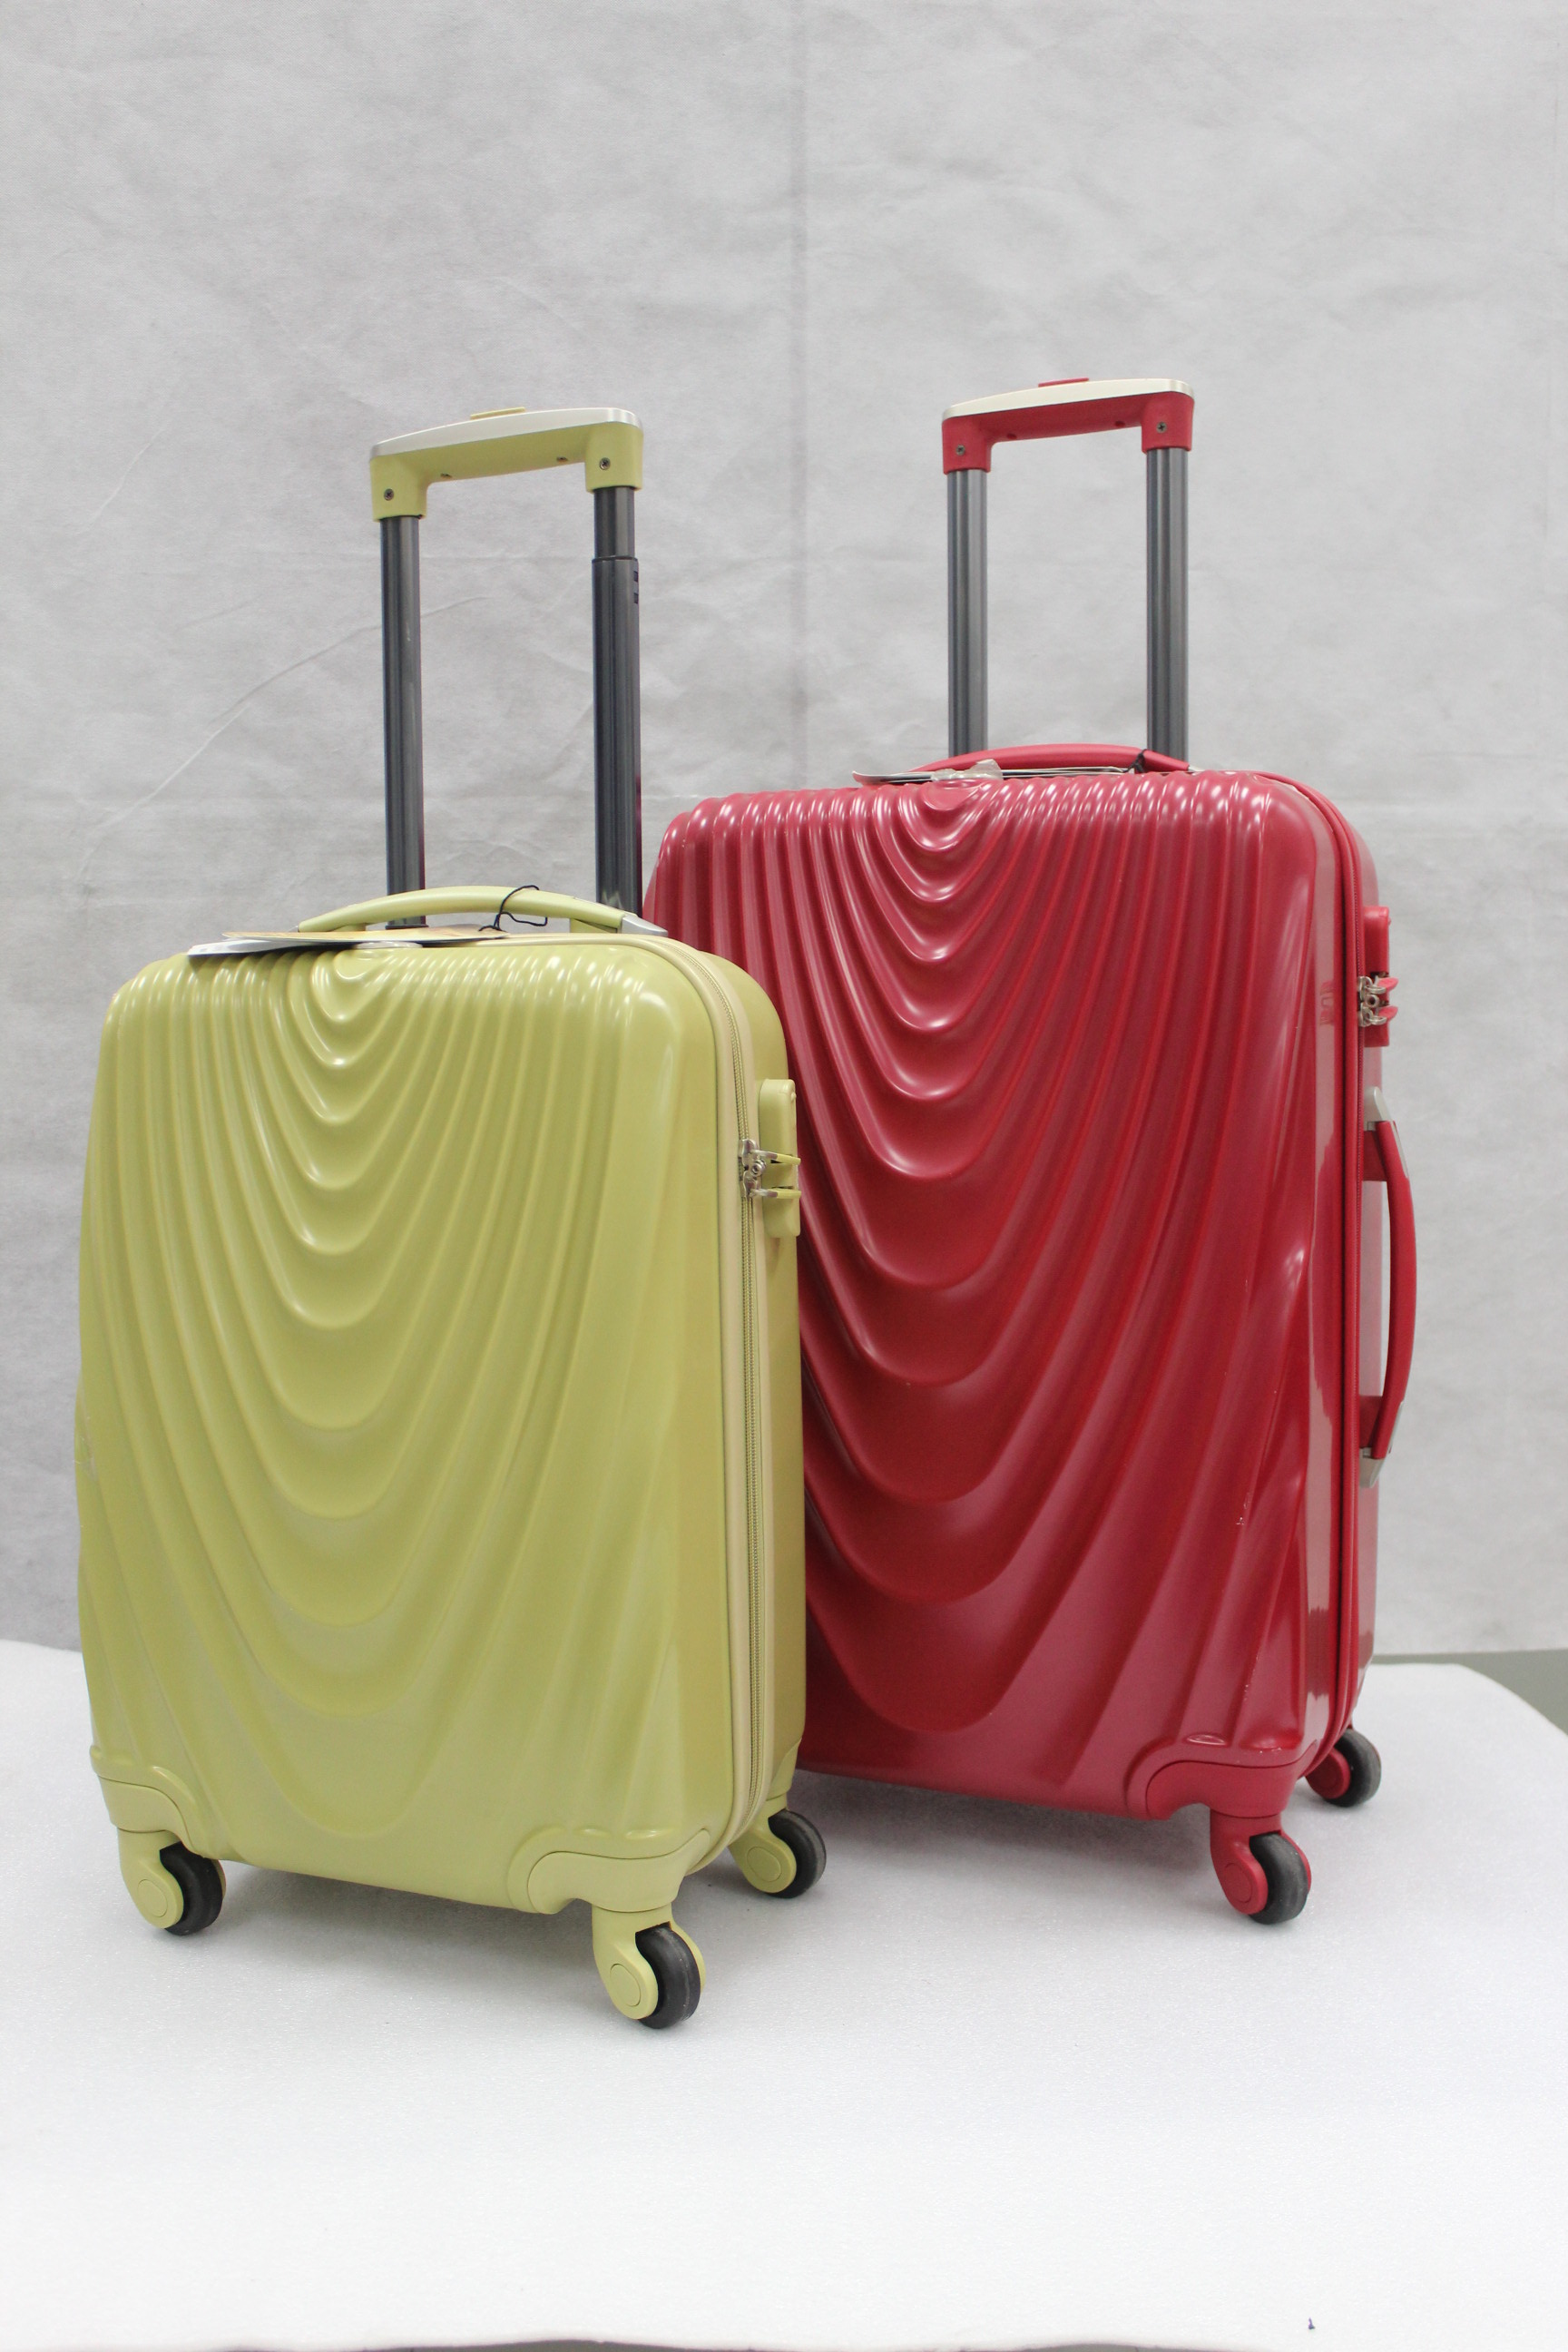 yanteng american tourister luggage with fantastic design